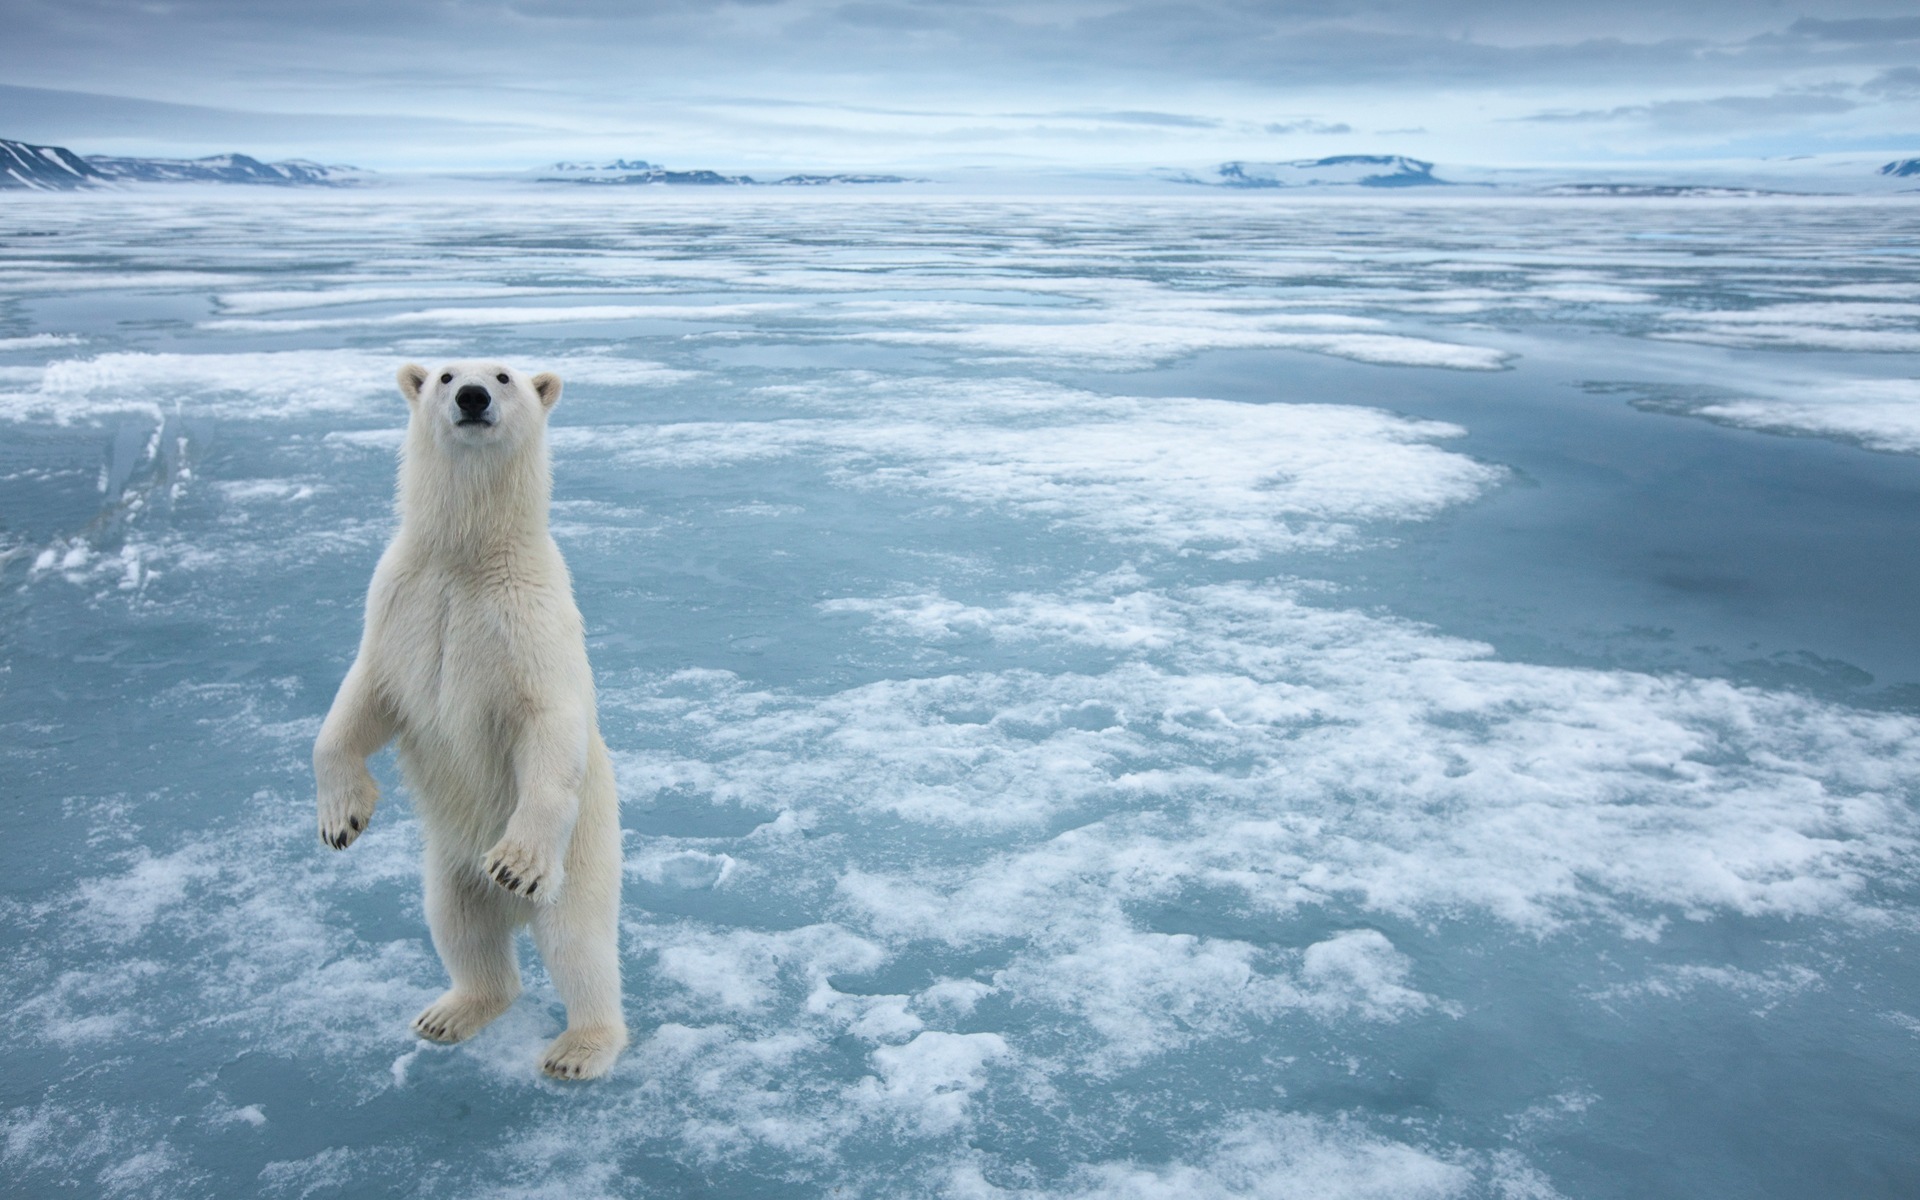 Windows 8 Wallpapers: Arctic, the nature ecological landscape, arctic animals #6 - 1920x1200